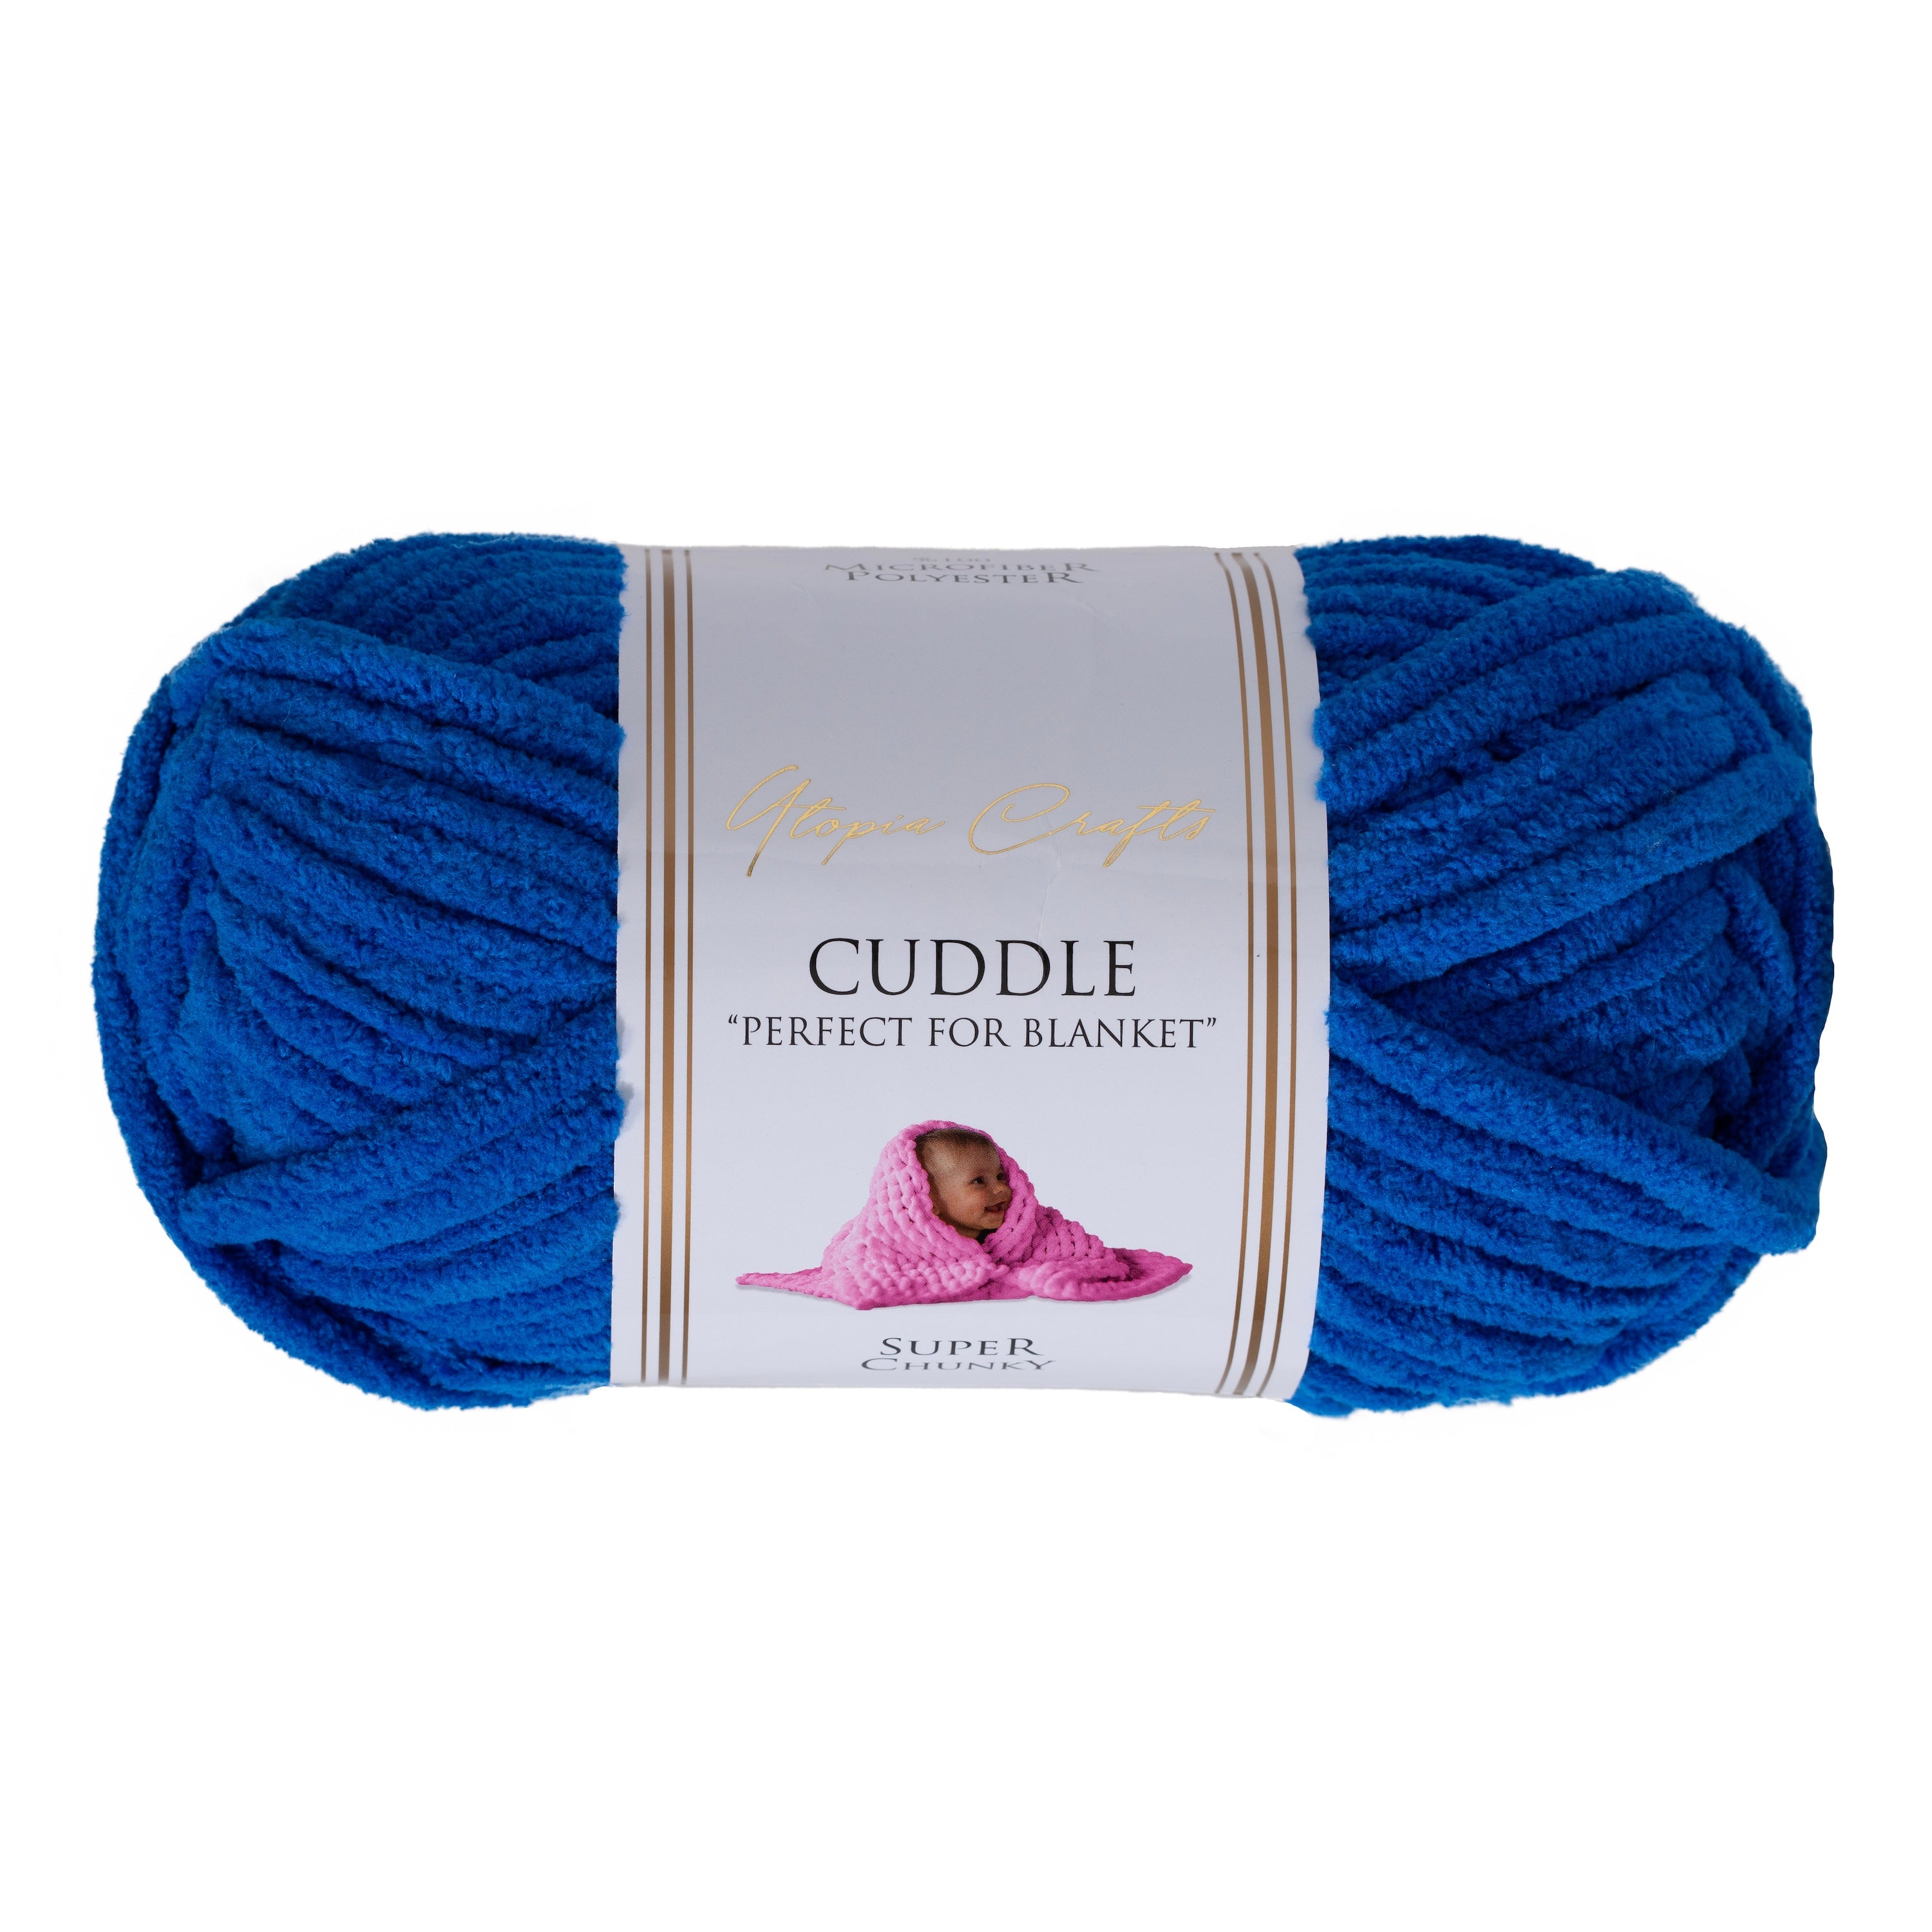 Utopia Crafts Cuddle Super Chunky Chenille Soft Yarn for Knitting and Crochet, 100g - 60m (Royal Blue)